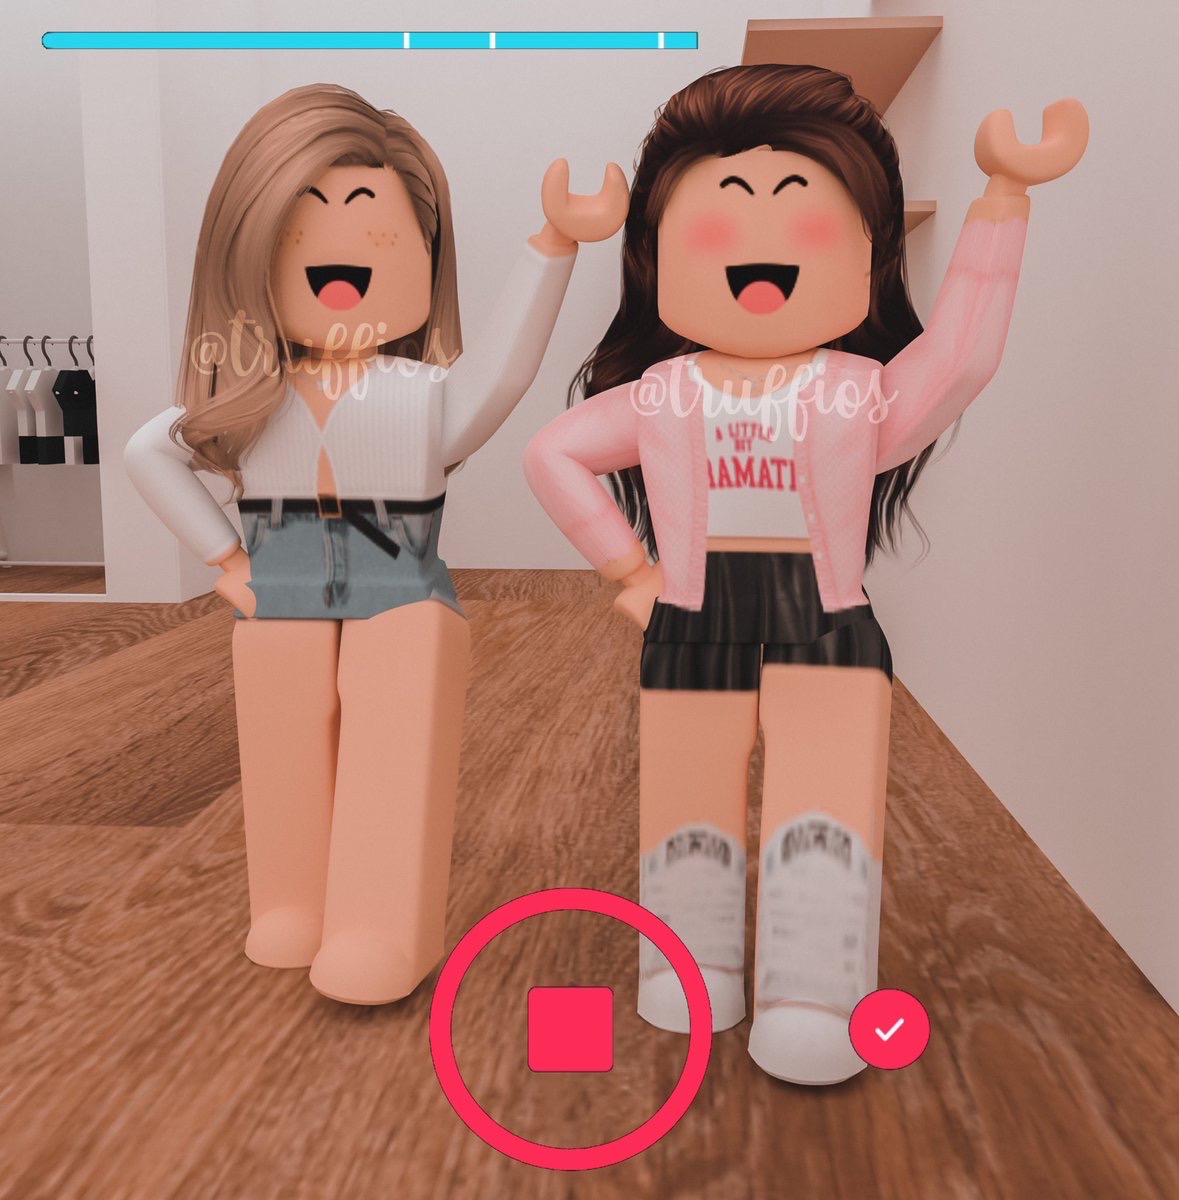 Aesthetic Cute Roblox Girl Image By 𝘊𝘩𝘦𝘳𝘳𝘺 - female roblox avatars